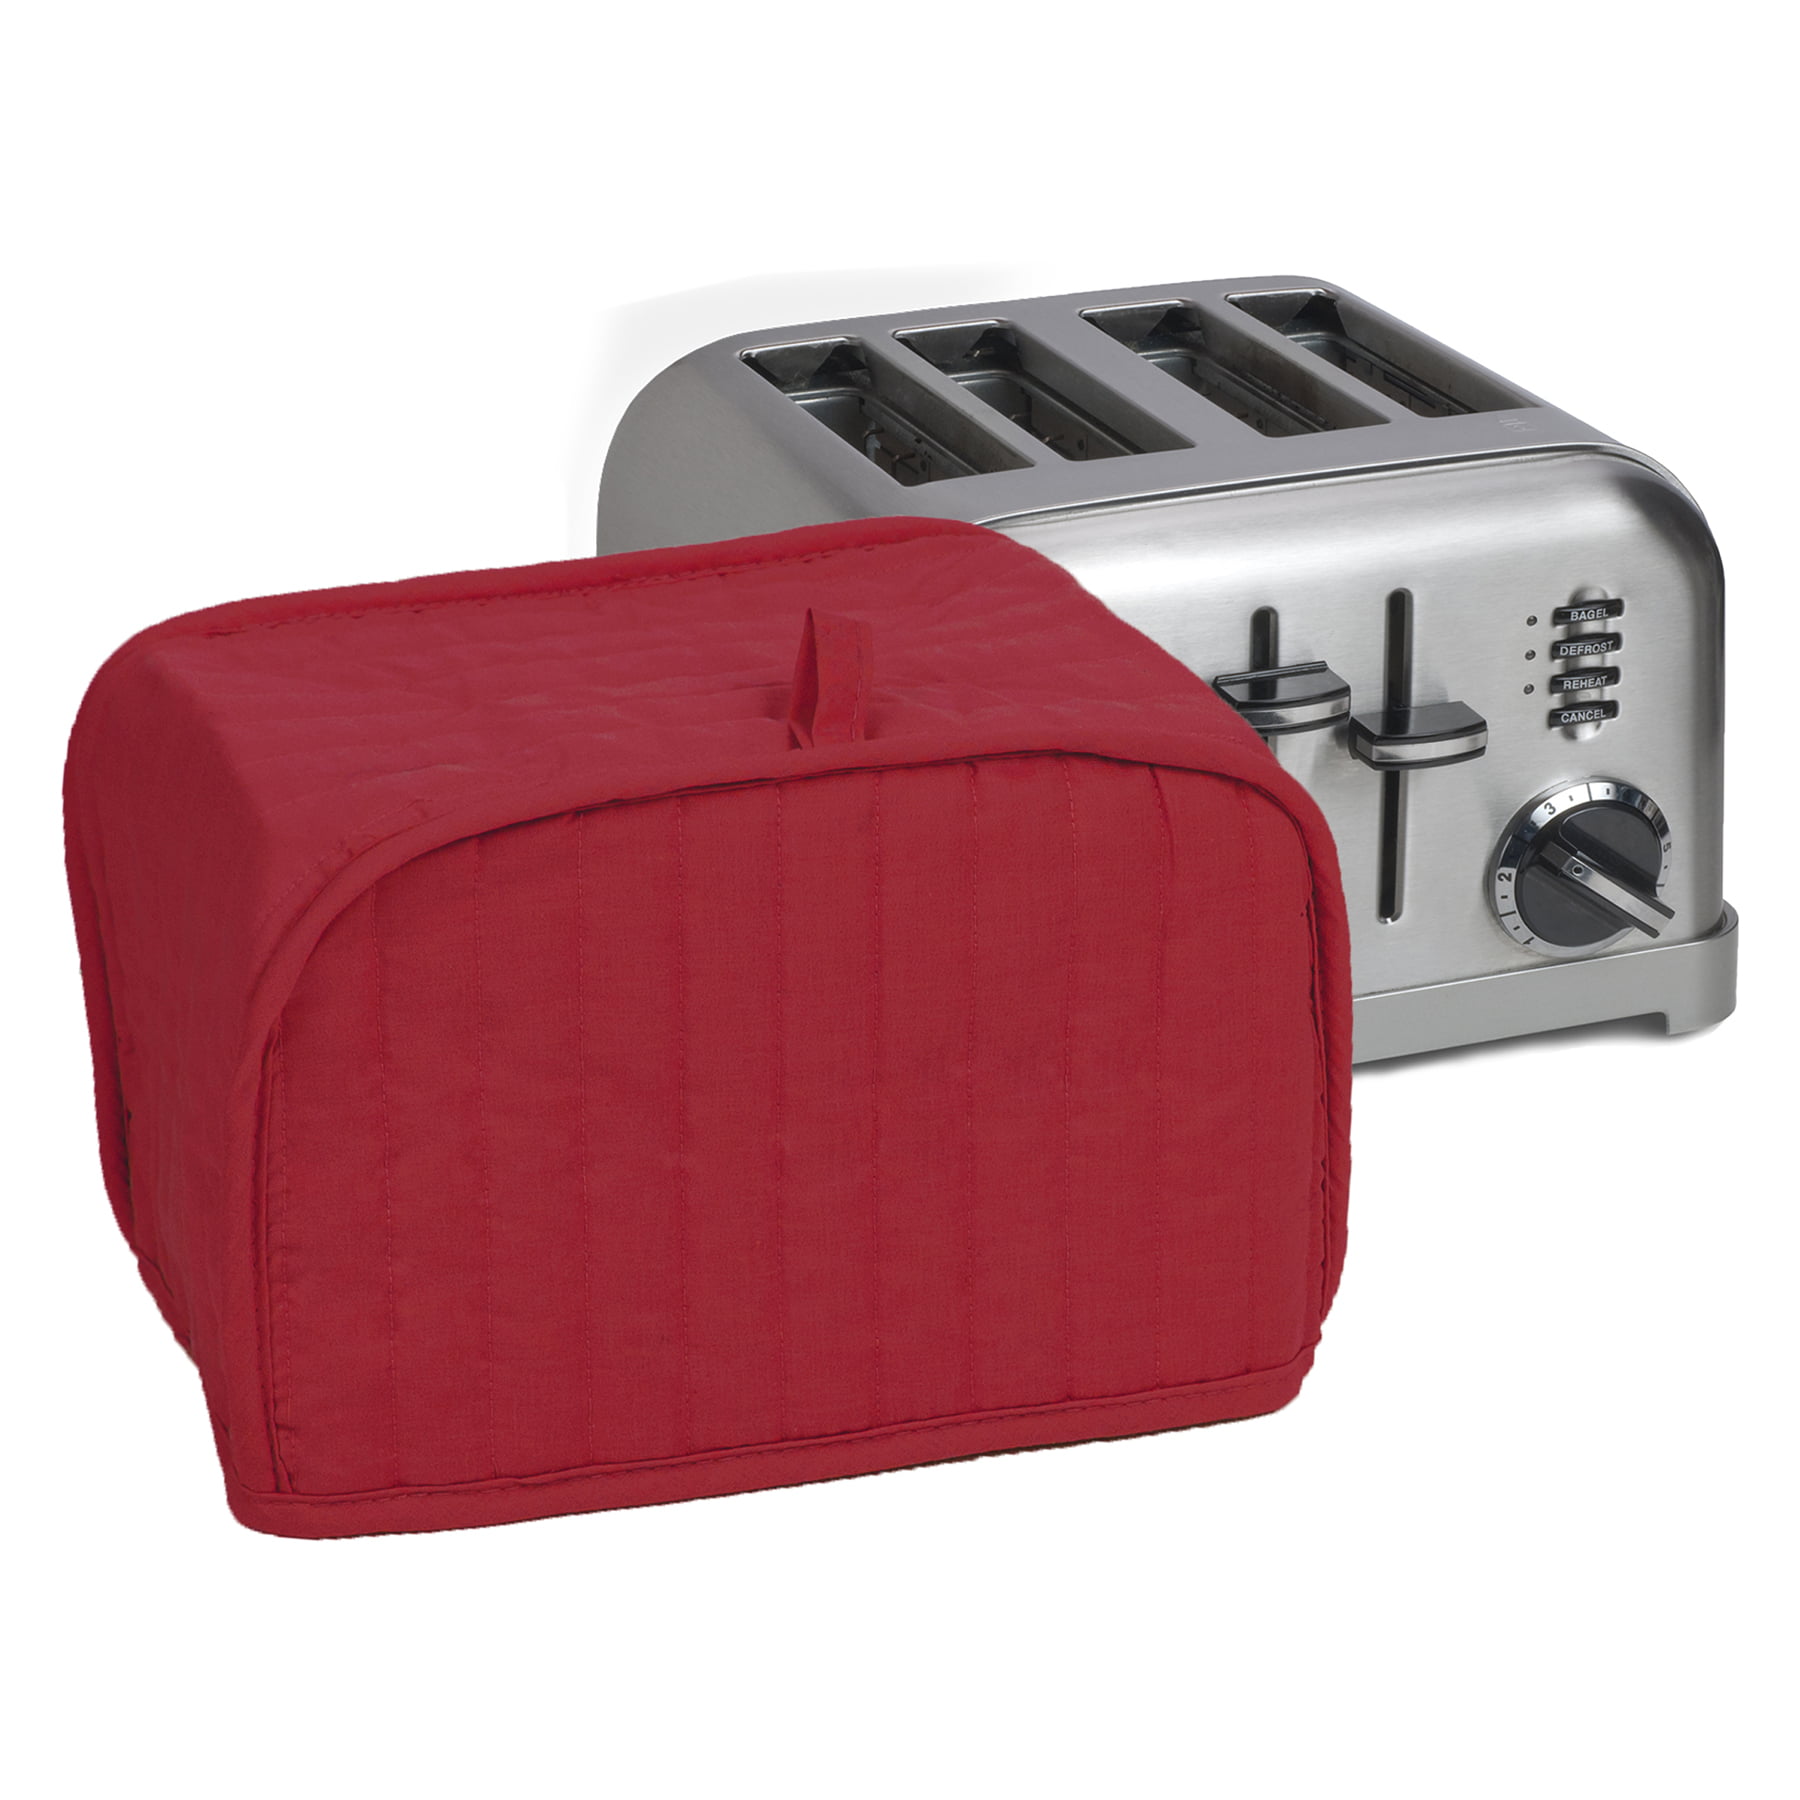 Black Kitchen Dining & Bar Small Ritz Quilted Four Slice Toaster Cover 